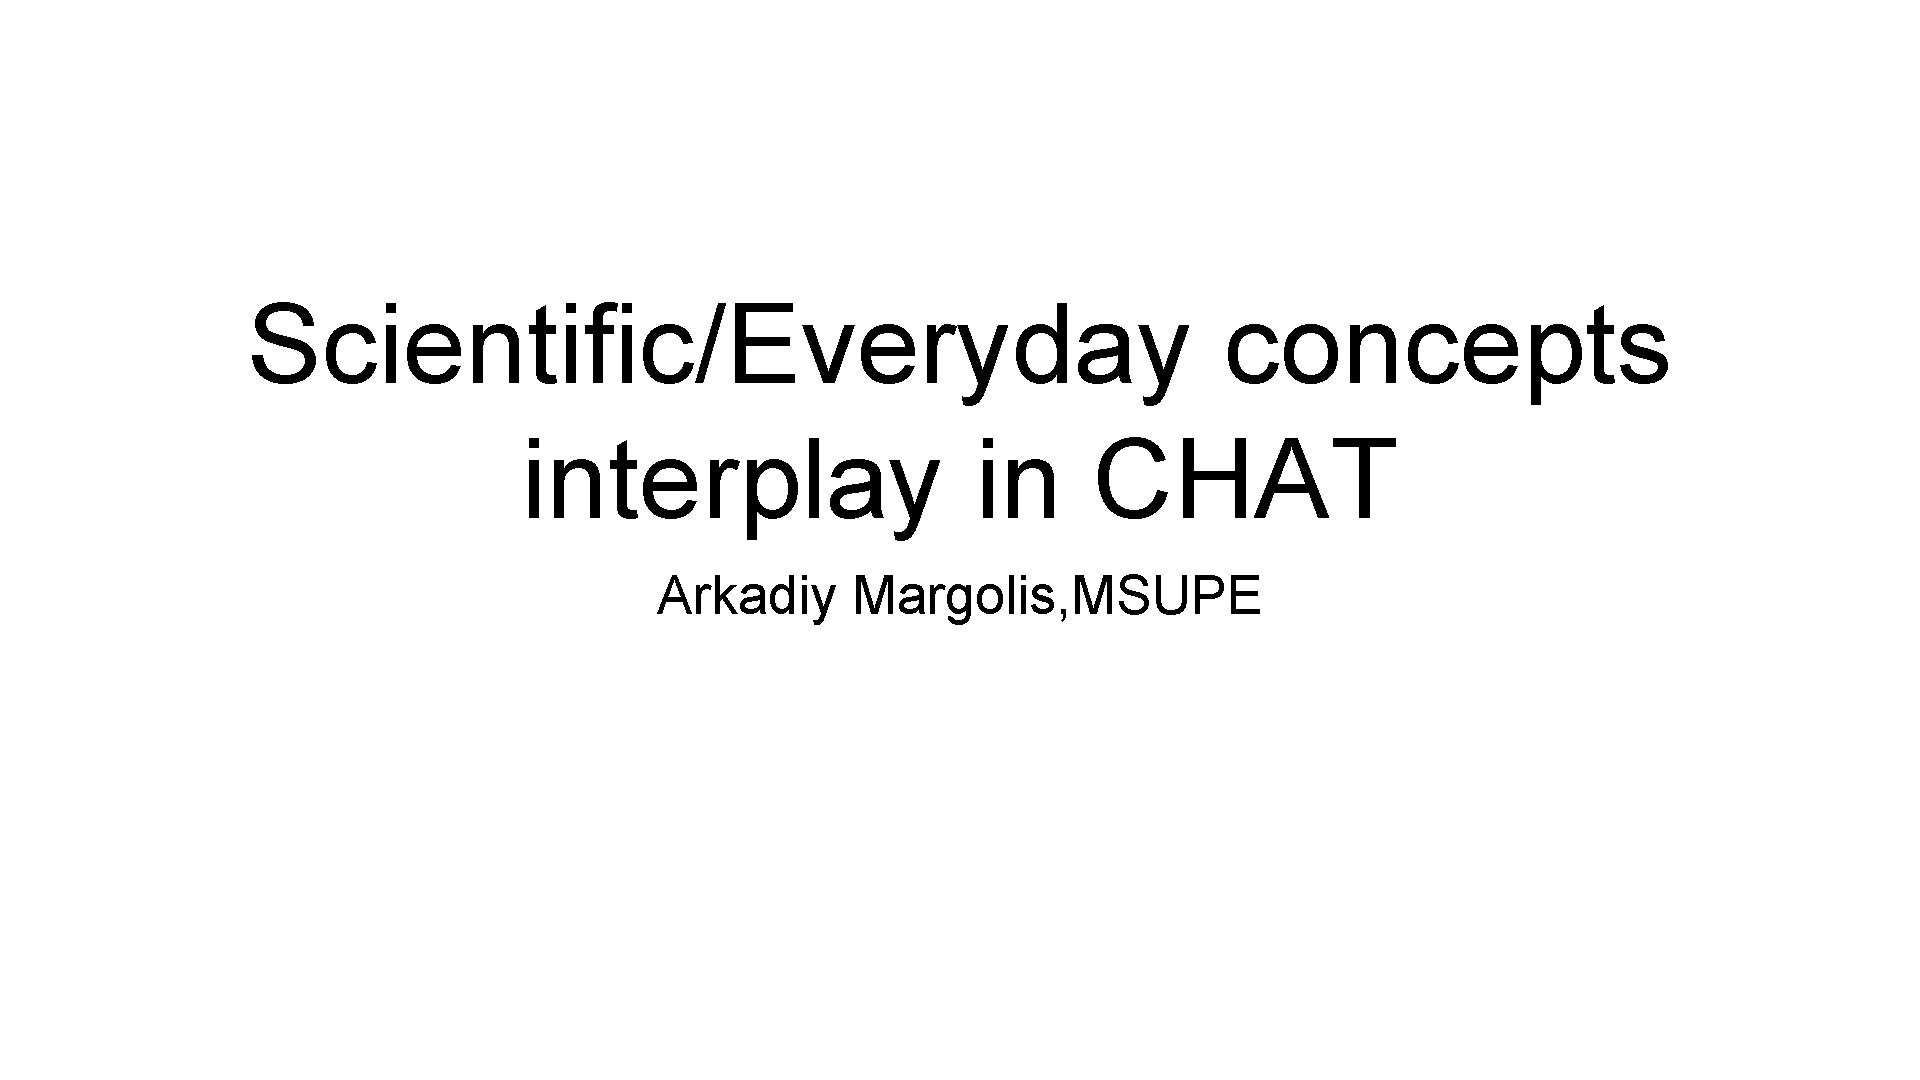 Scientific/Everyday concepts interplay in CHAT Arkadiy Margolis, MSUPE 